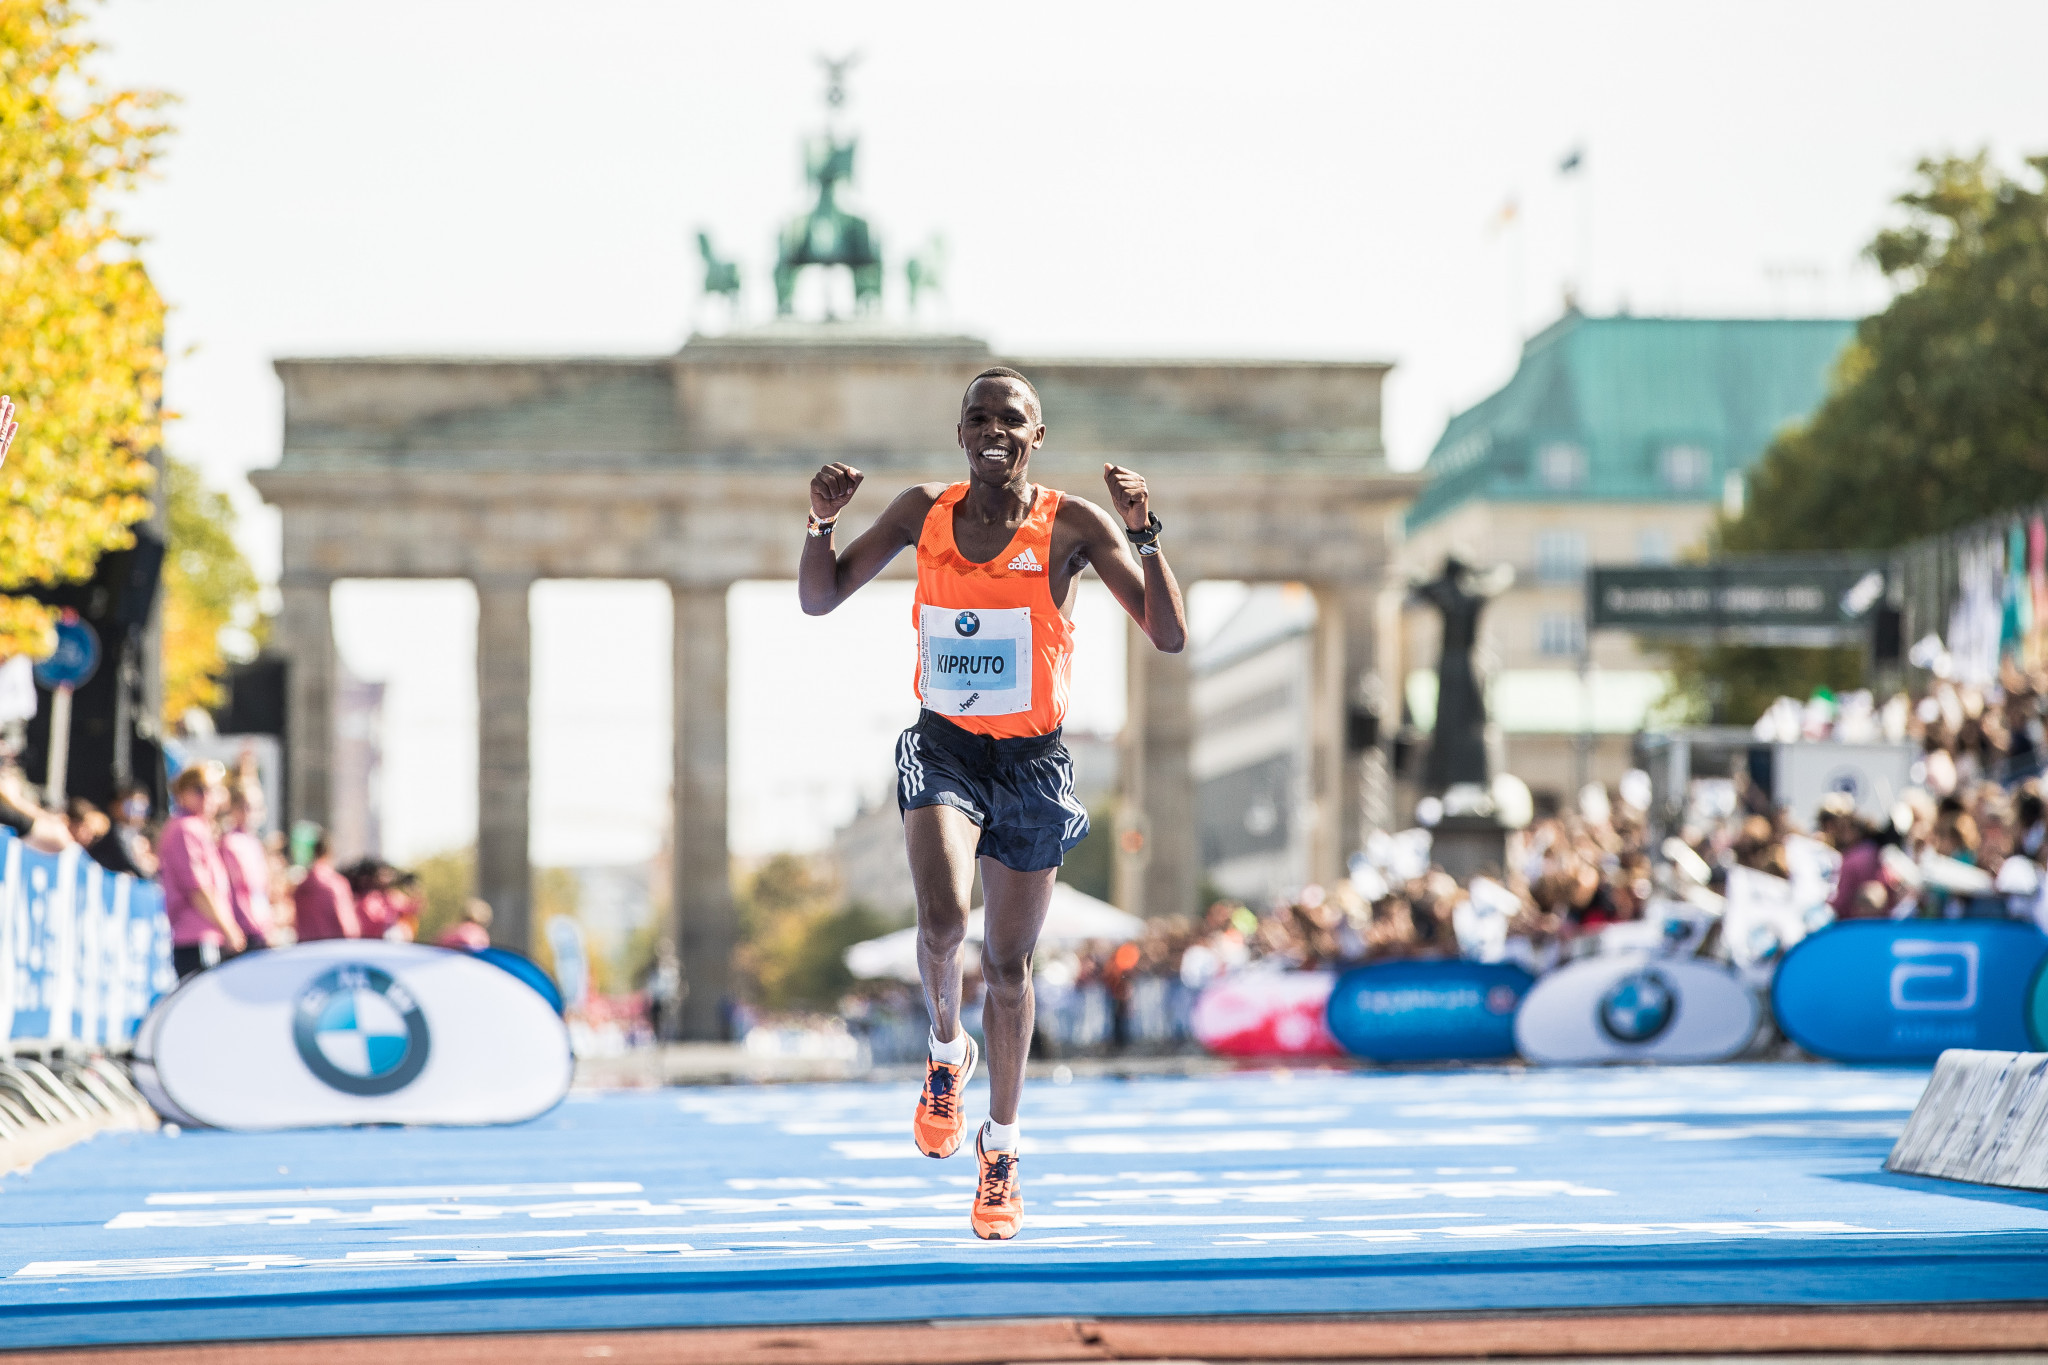 The Berlin Marathon is yet to be announced as cancelled or postponed ©Getty Images